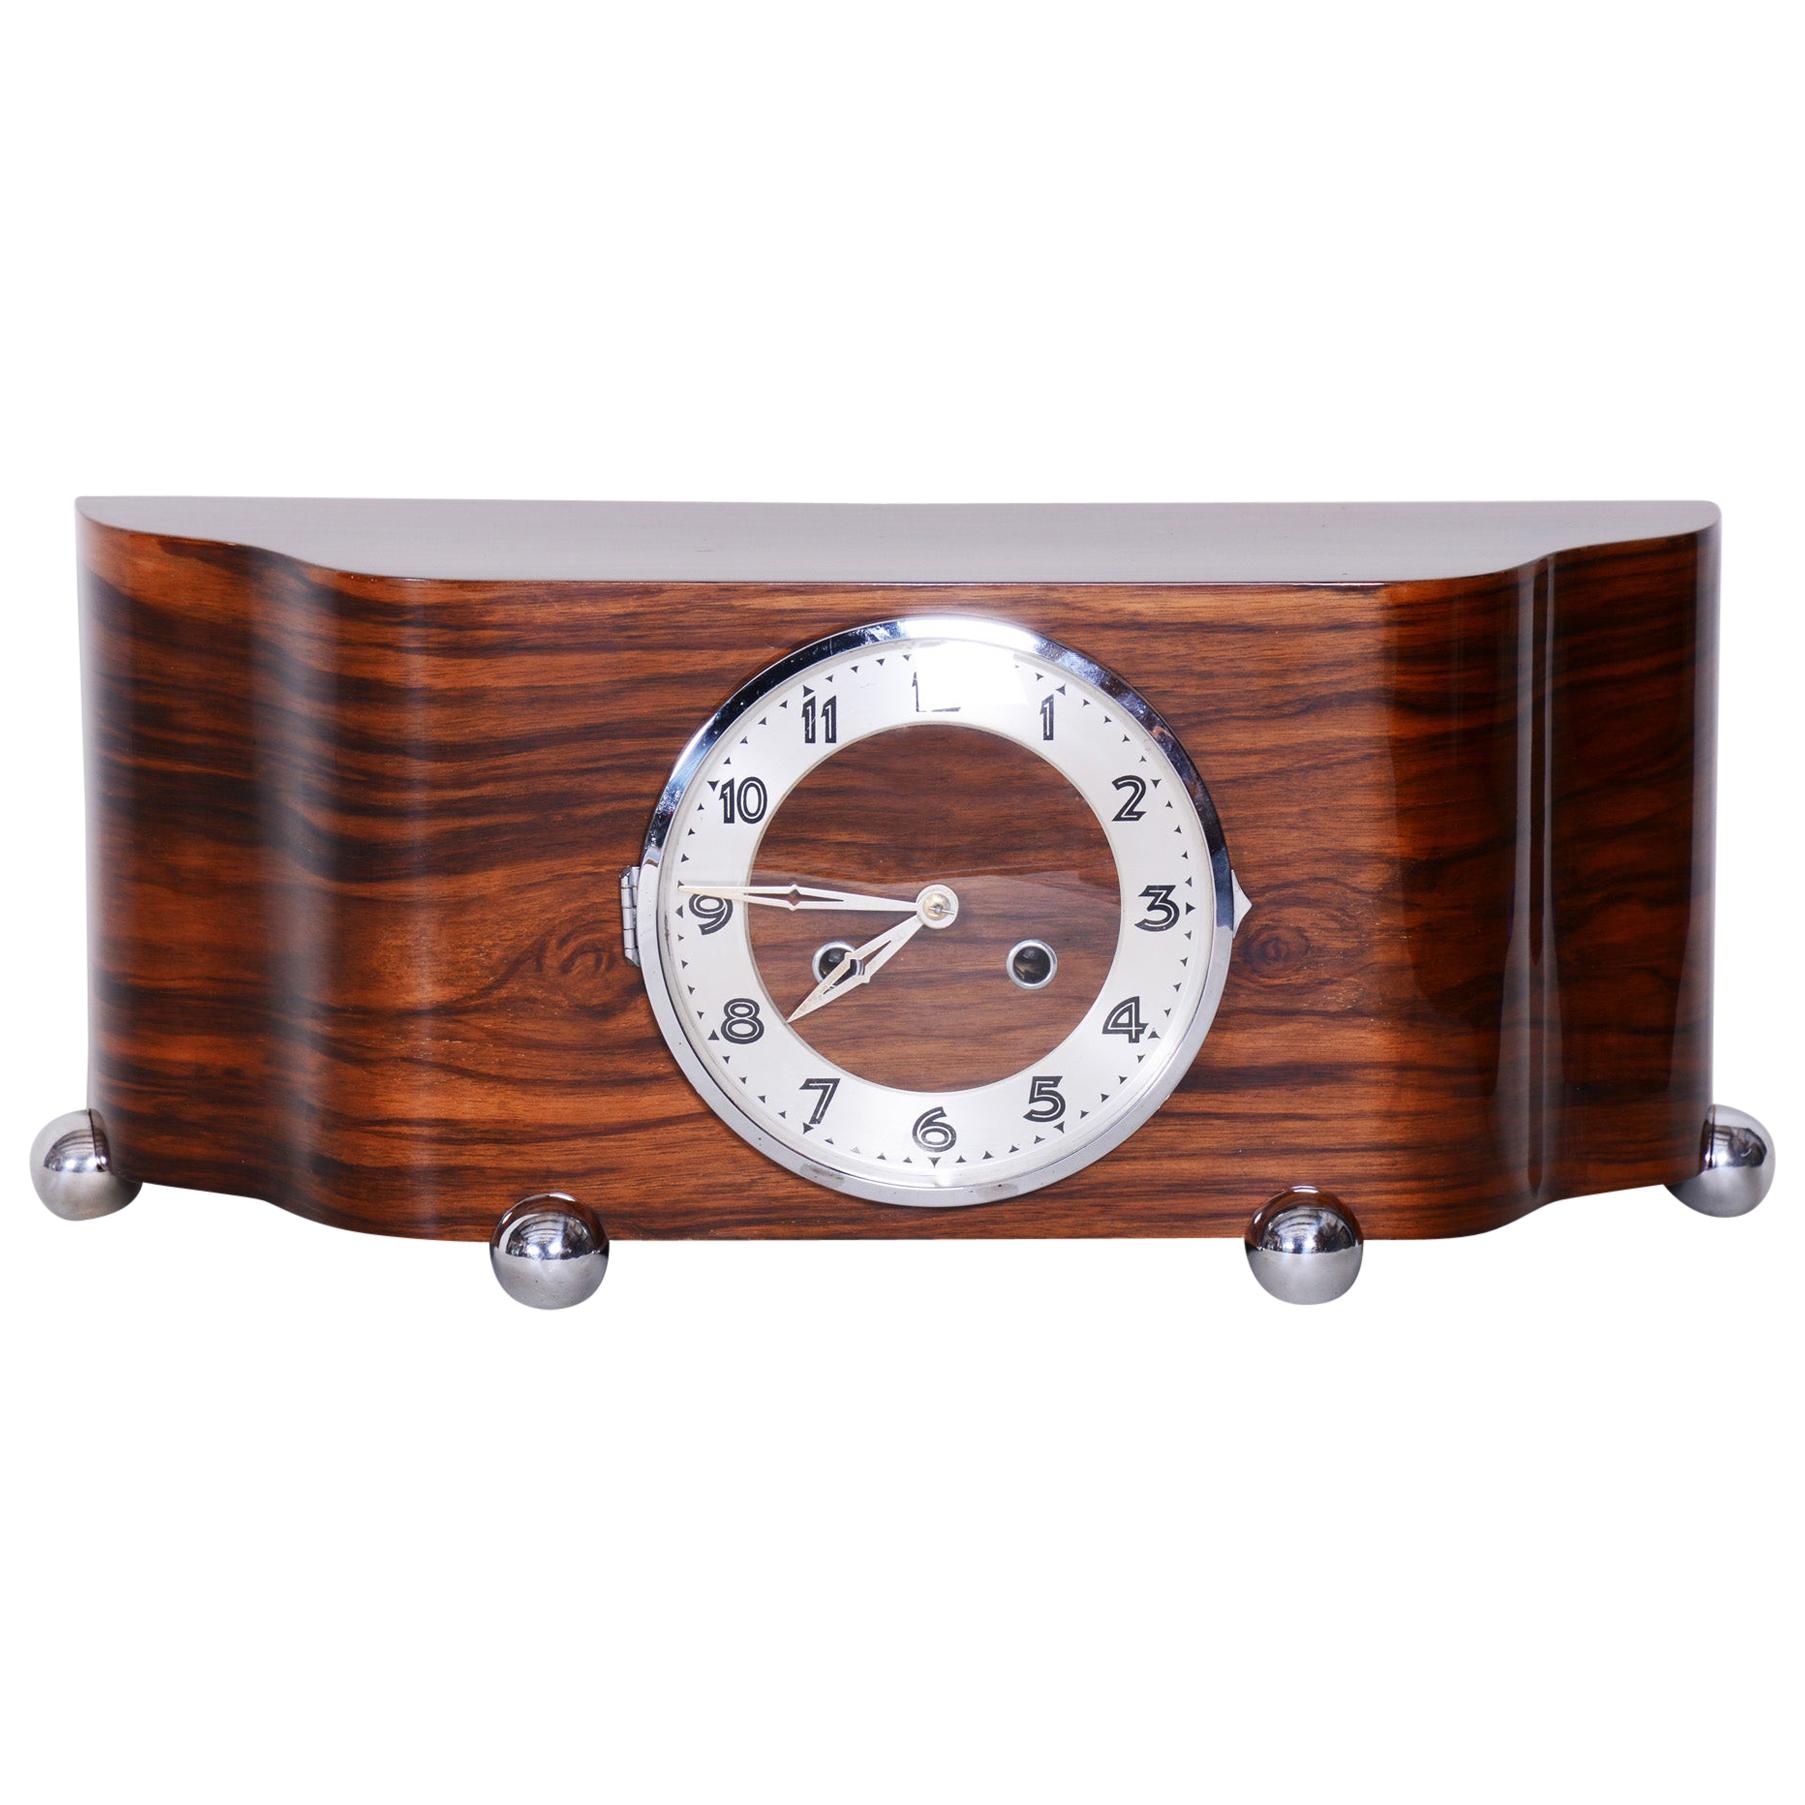 Completely Restored Unique Art Deco Walnut Table Clock, High Gloss, 1930s